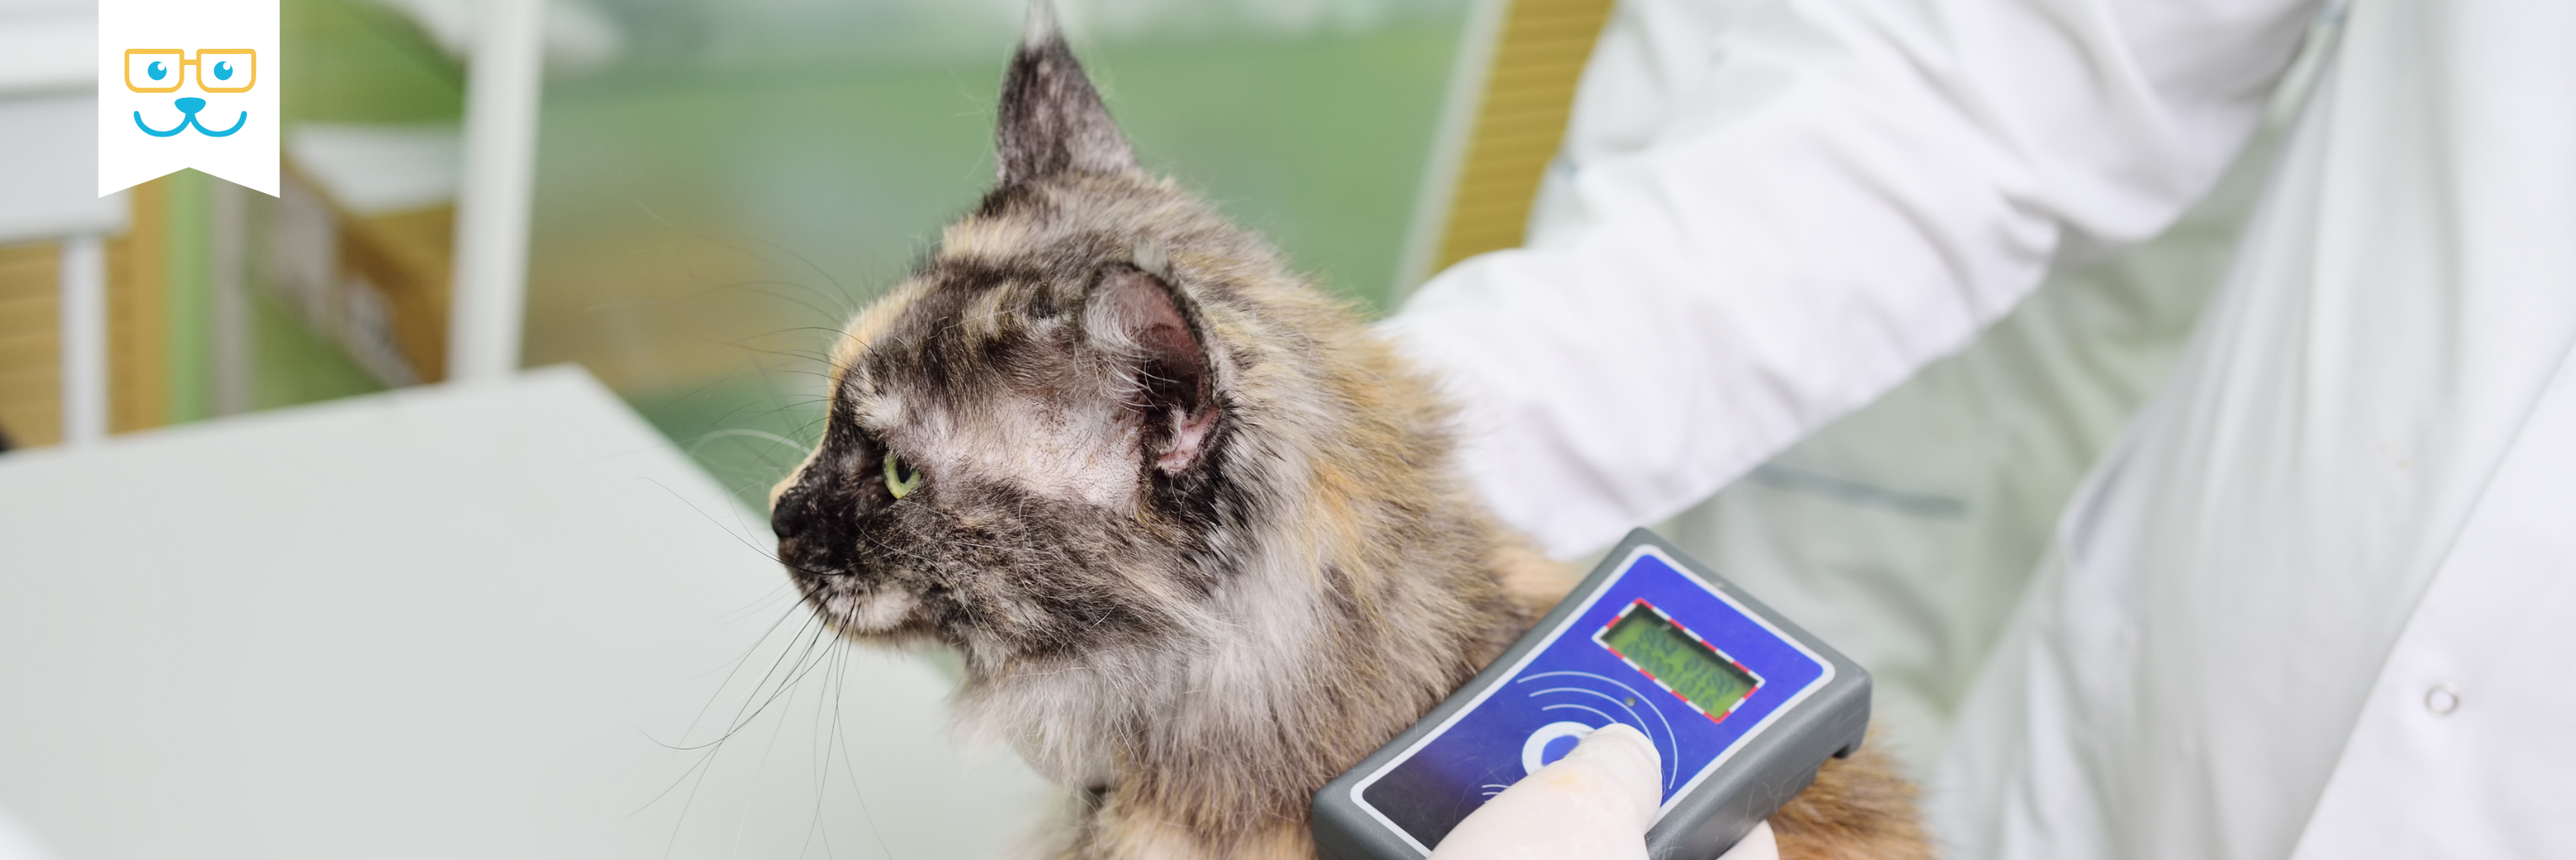 cat microchipping information